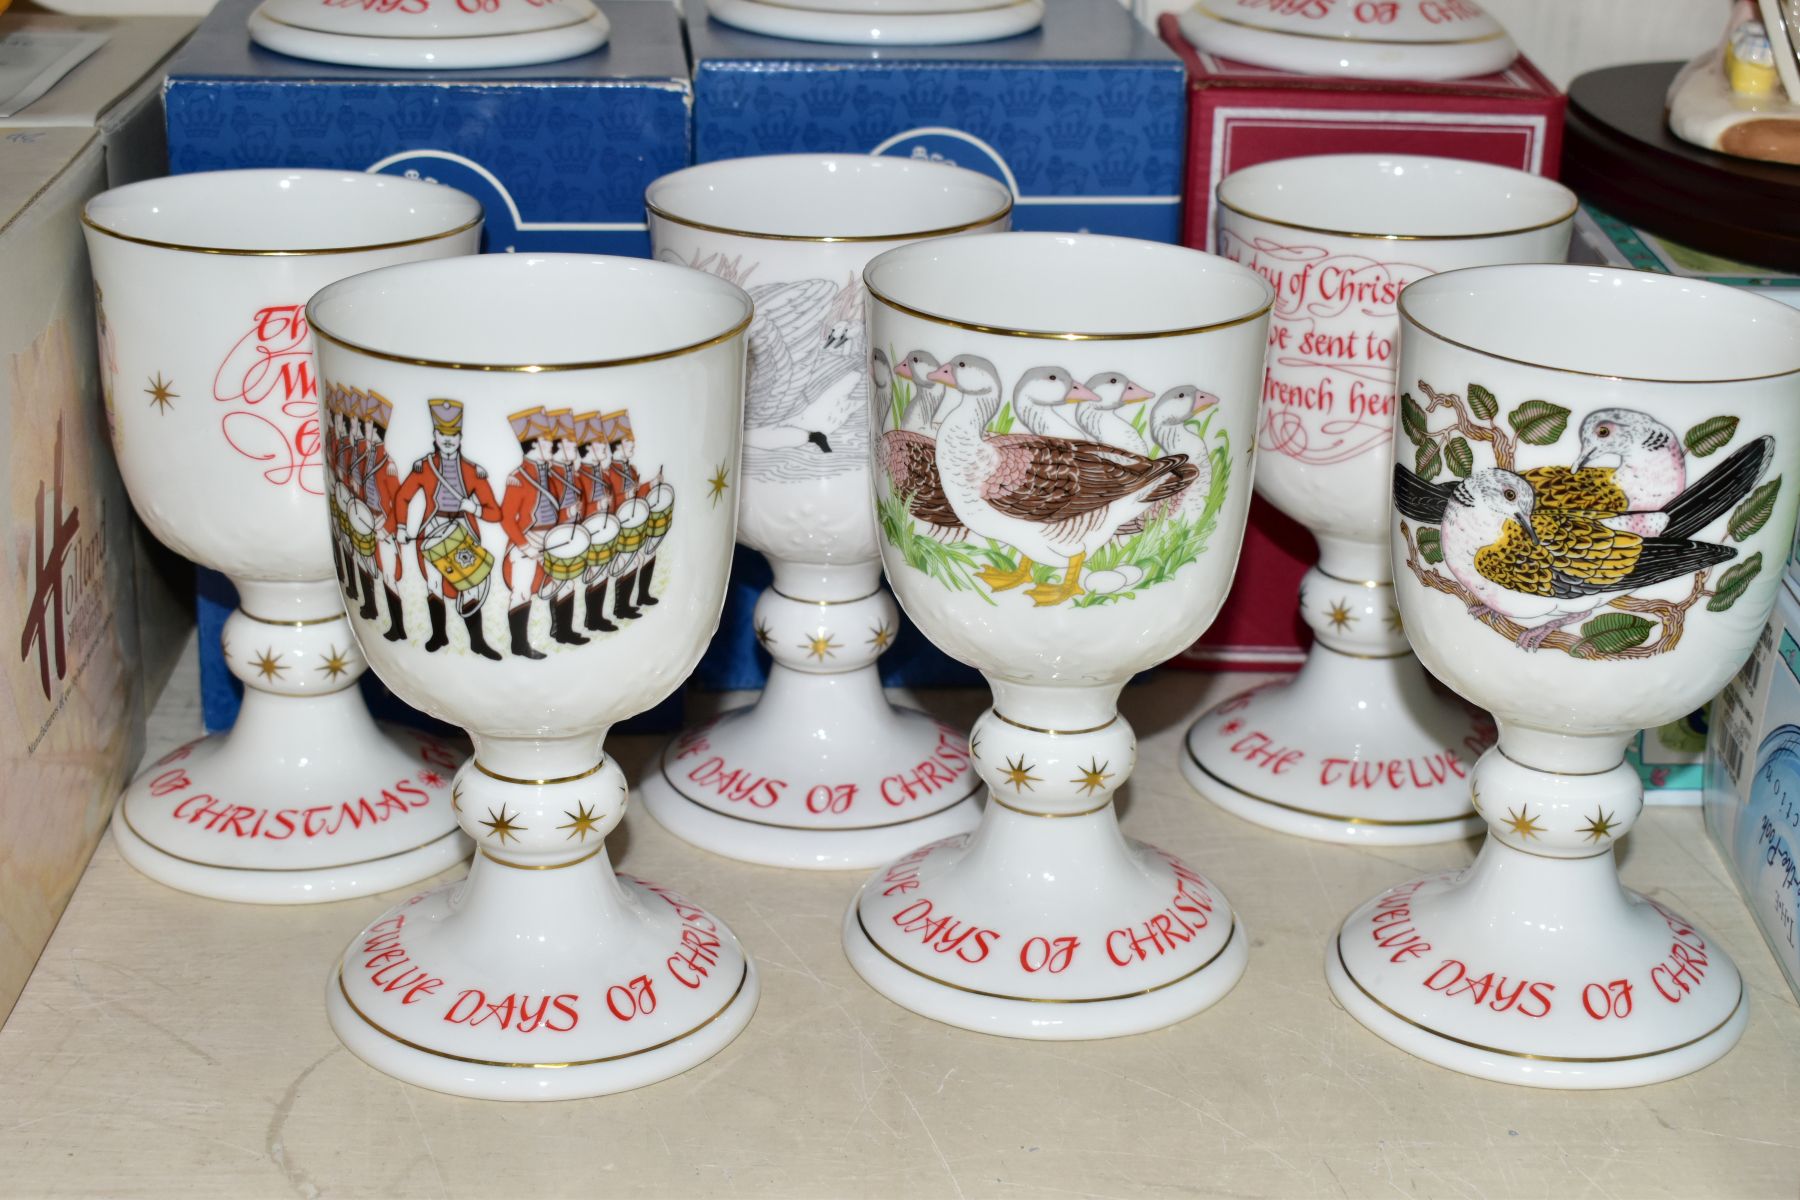 A SET OF TWELVE LIMITED EDITION ROYAL DOULTON GOBLETS, The Twelve Days of Christmas, limited to 10, - Image 4 of 6